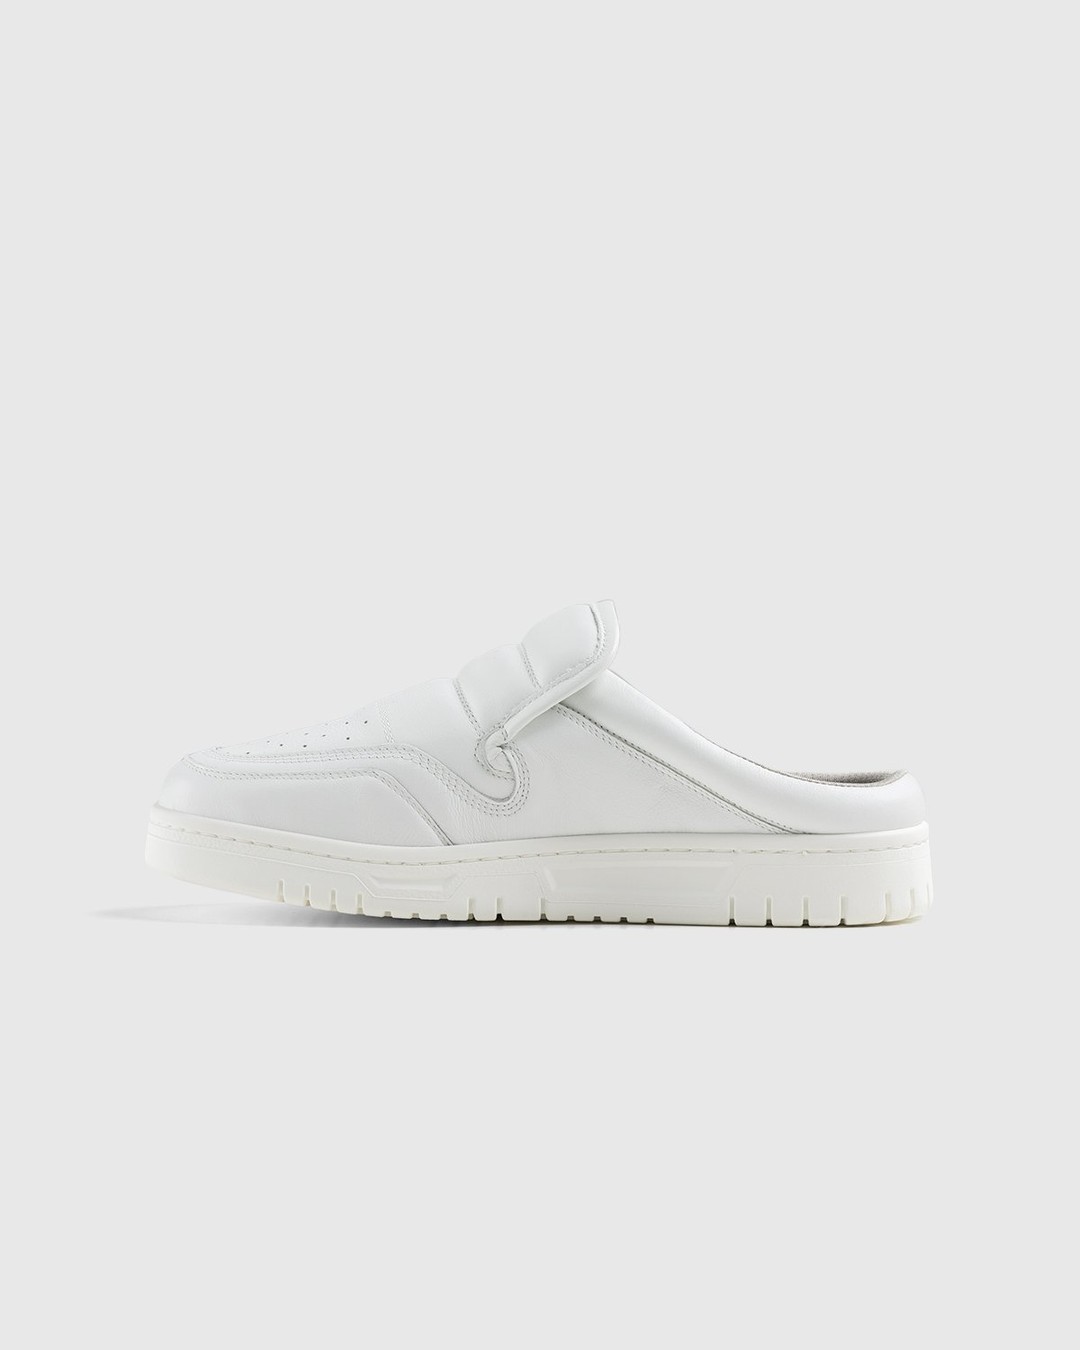 Acne Studios – Cow Leather Mule White - Sneakers - White - Image 2